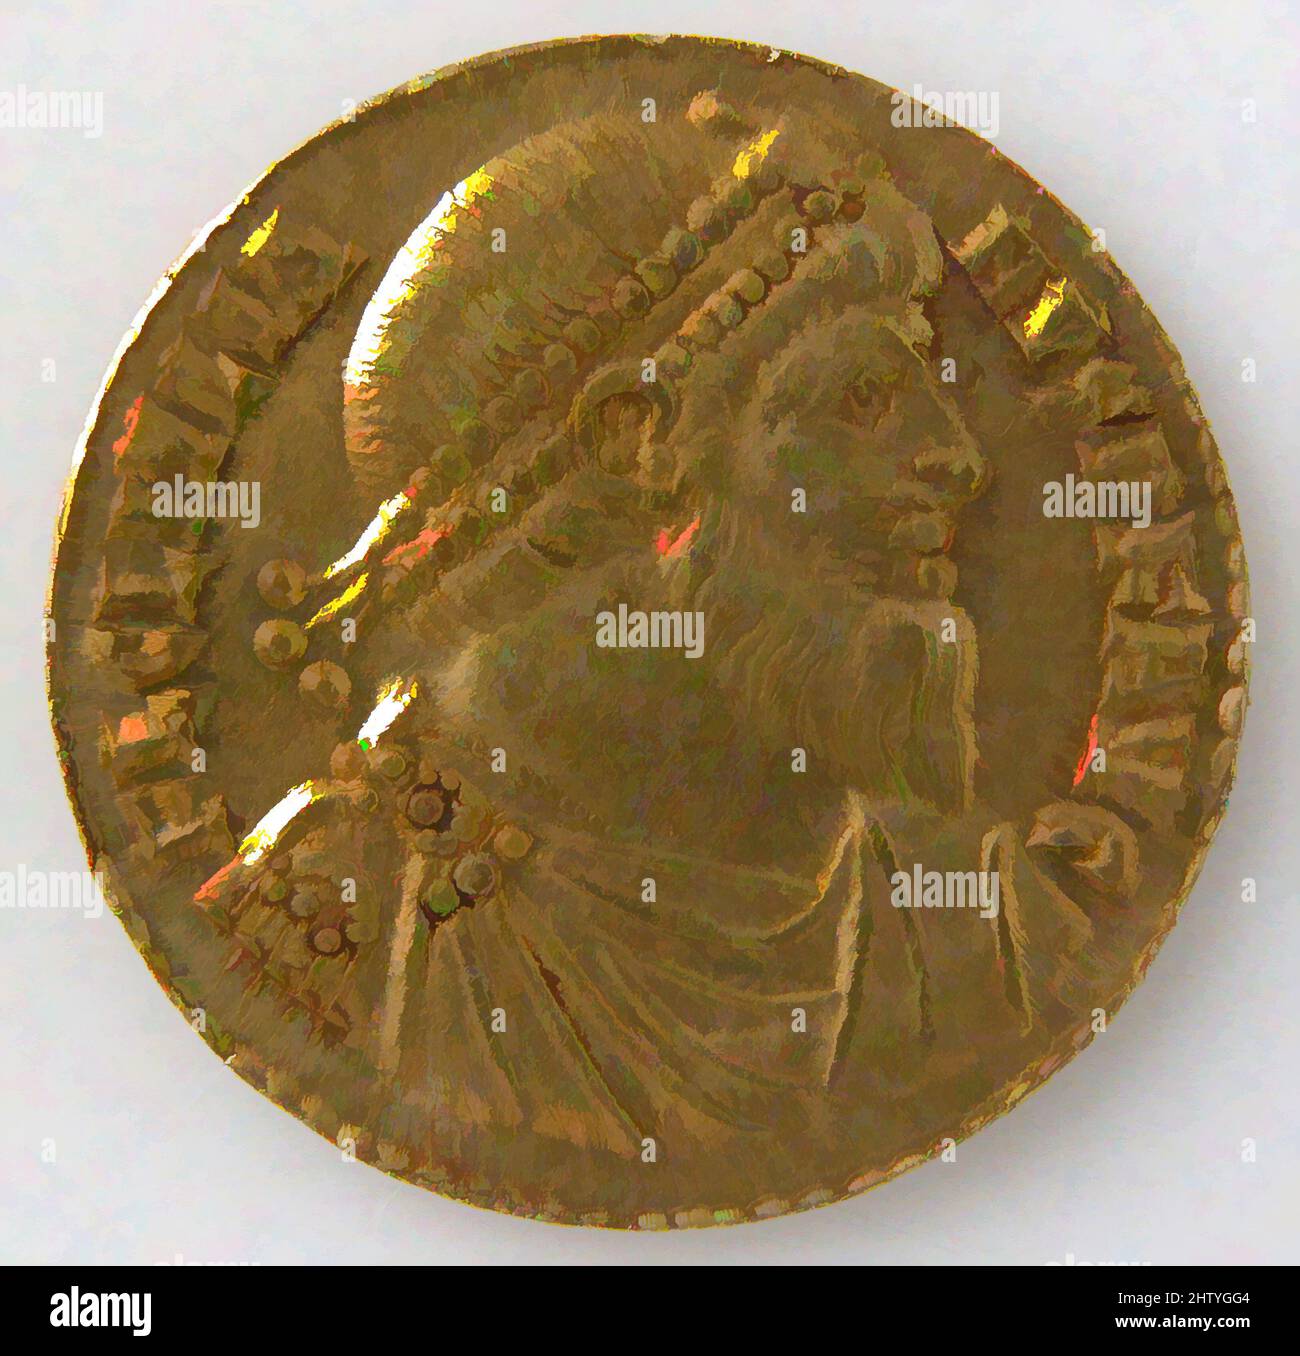 Art inspired by Solidus, 381–383, Byzantine, Gold, Overall: 3/4 x 1/16 in. (1.9 x 0.1 cm), Coins, Classic works modernized by Artotop with a splash of modernity. Shapes, color and value, eye-catching visual impact on art. Emotions through freedom of artworks in a contemporary way. A timeless message pursuing a wildly creative new direction. Artists turning to the digital medium and creating the Artotop NFT Stock Photo